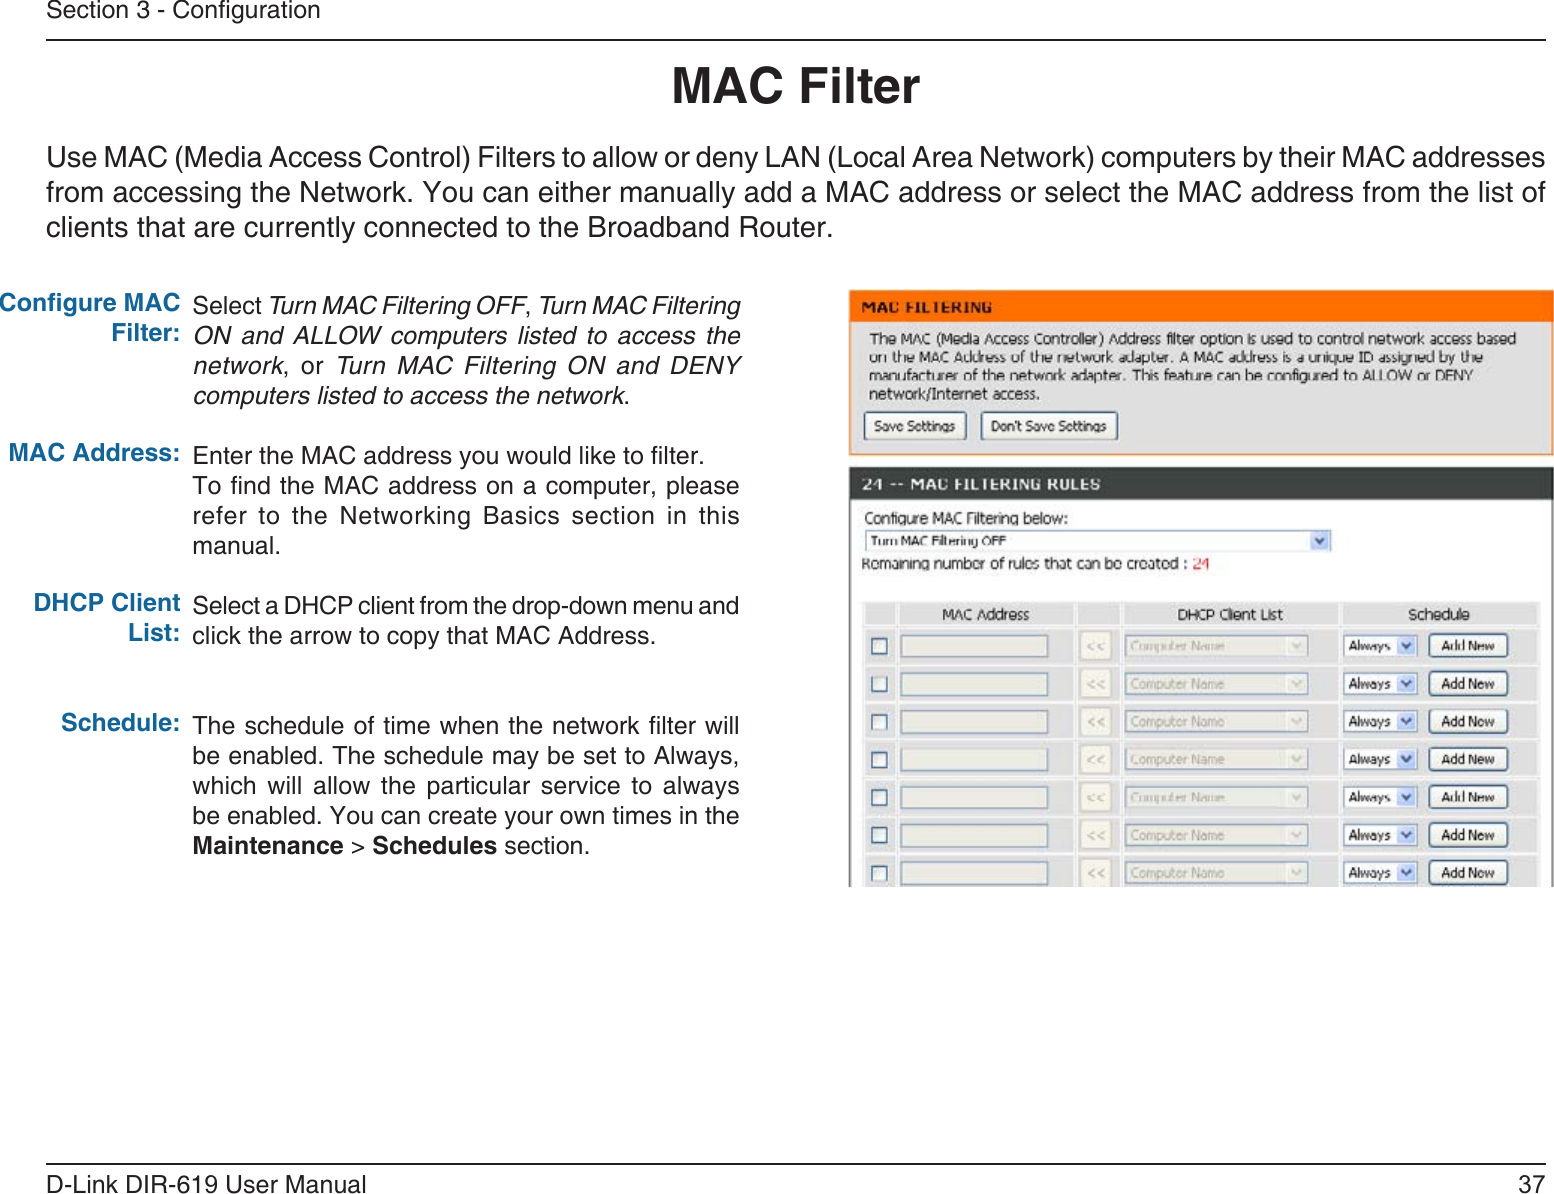 37D-Link DIR-619 User ManualSection 3 - CongurationMAC FilterSelect Turn MAC Filtering OFF, Turn MAC FilteringON  and  ALLOW  computers  listed  to  access  thenetwork, or Turn  MAC  Filtering  ON  and  DENYcomputers listed to access the network. Enter the MAC address you would like to lter.To nd the MAC address on a computer, please refer  to  the  Networking  Basics  section  in  thismanual.Select a DHCP client from the drop-down menu andclick the arrow to copy that MAC Address. The schedule of time when the network lter will be enabled. The schedule may be set to Always, which  will  allow  the  particular  service  to  alwaysbe enabled. You can create your own times in theMaintenance &gt; Schedules section.Congure MAC Filter:MAC Address: DHCP Client List:Schedule:Use MAC (Media Access Control) Filters to allow or deny LAN (Local Area Network) computers by their MAC addressesfrom accessing the Network. You can either manually add a MAC address or select the MAC address from the list ofclients that are currently connected to the Broadband Router.